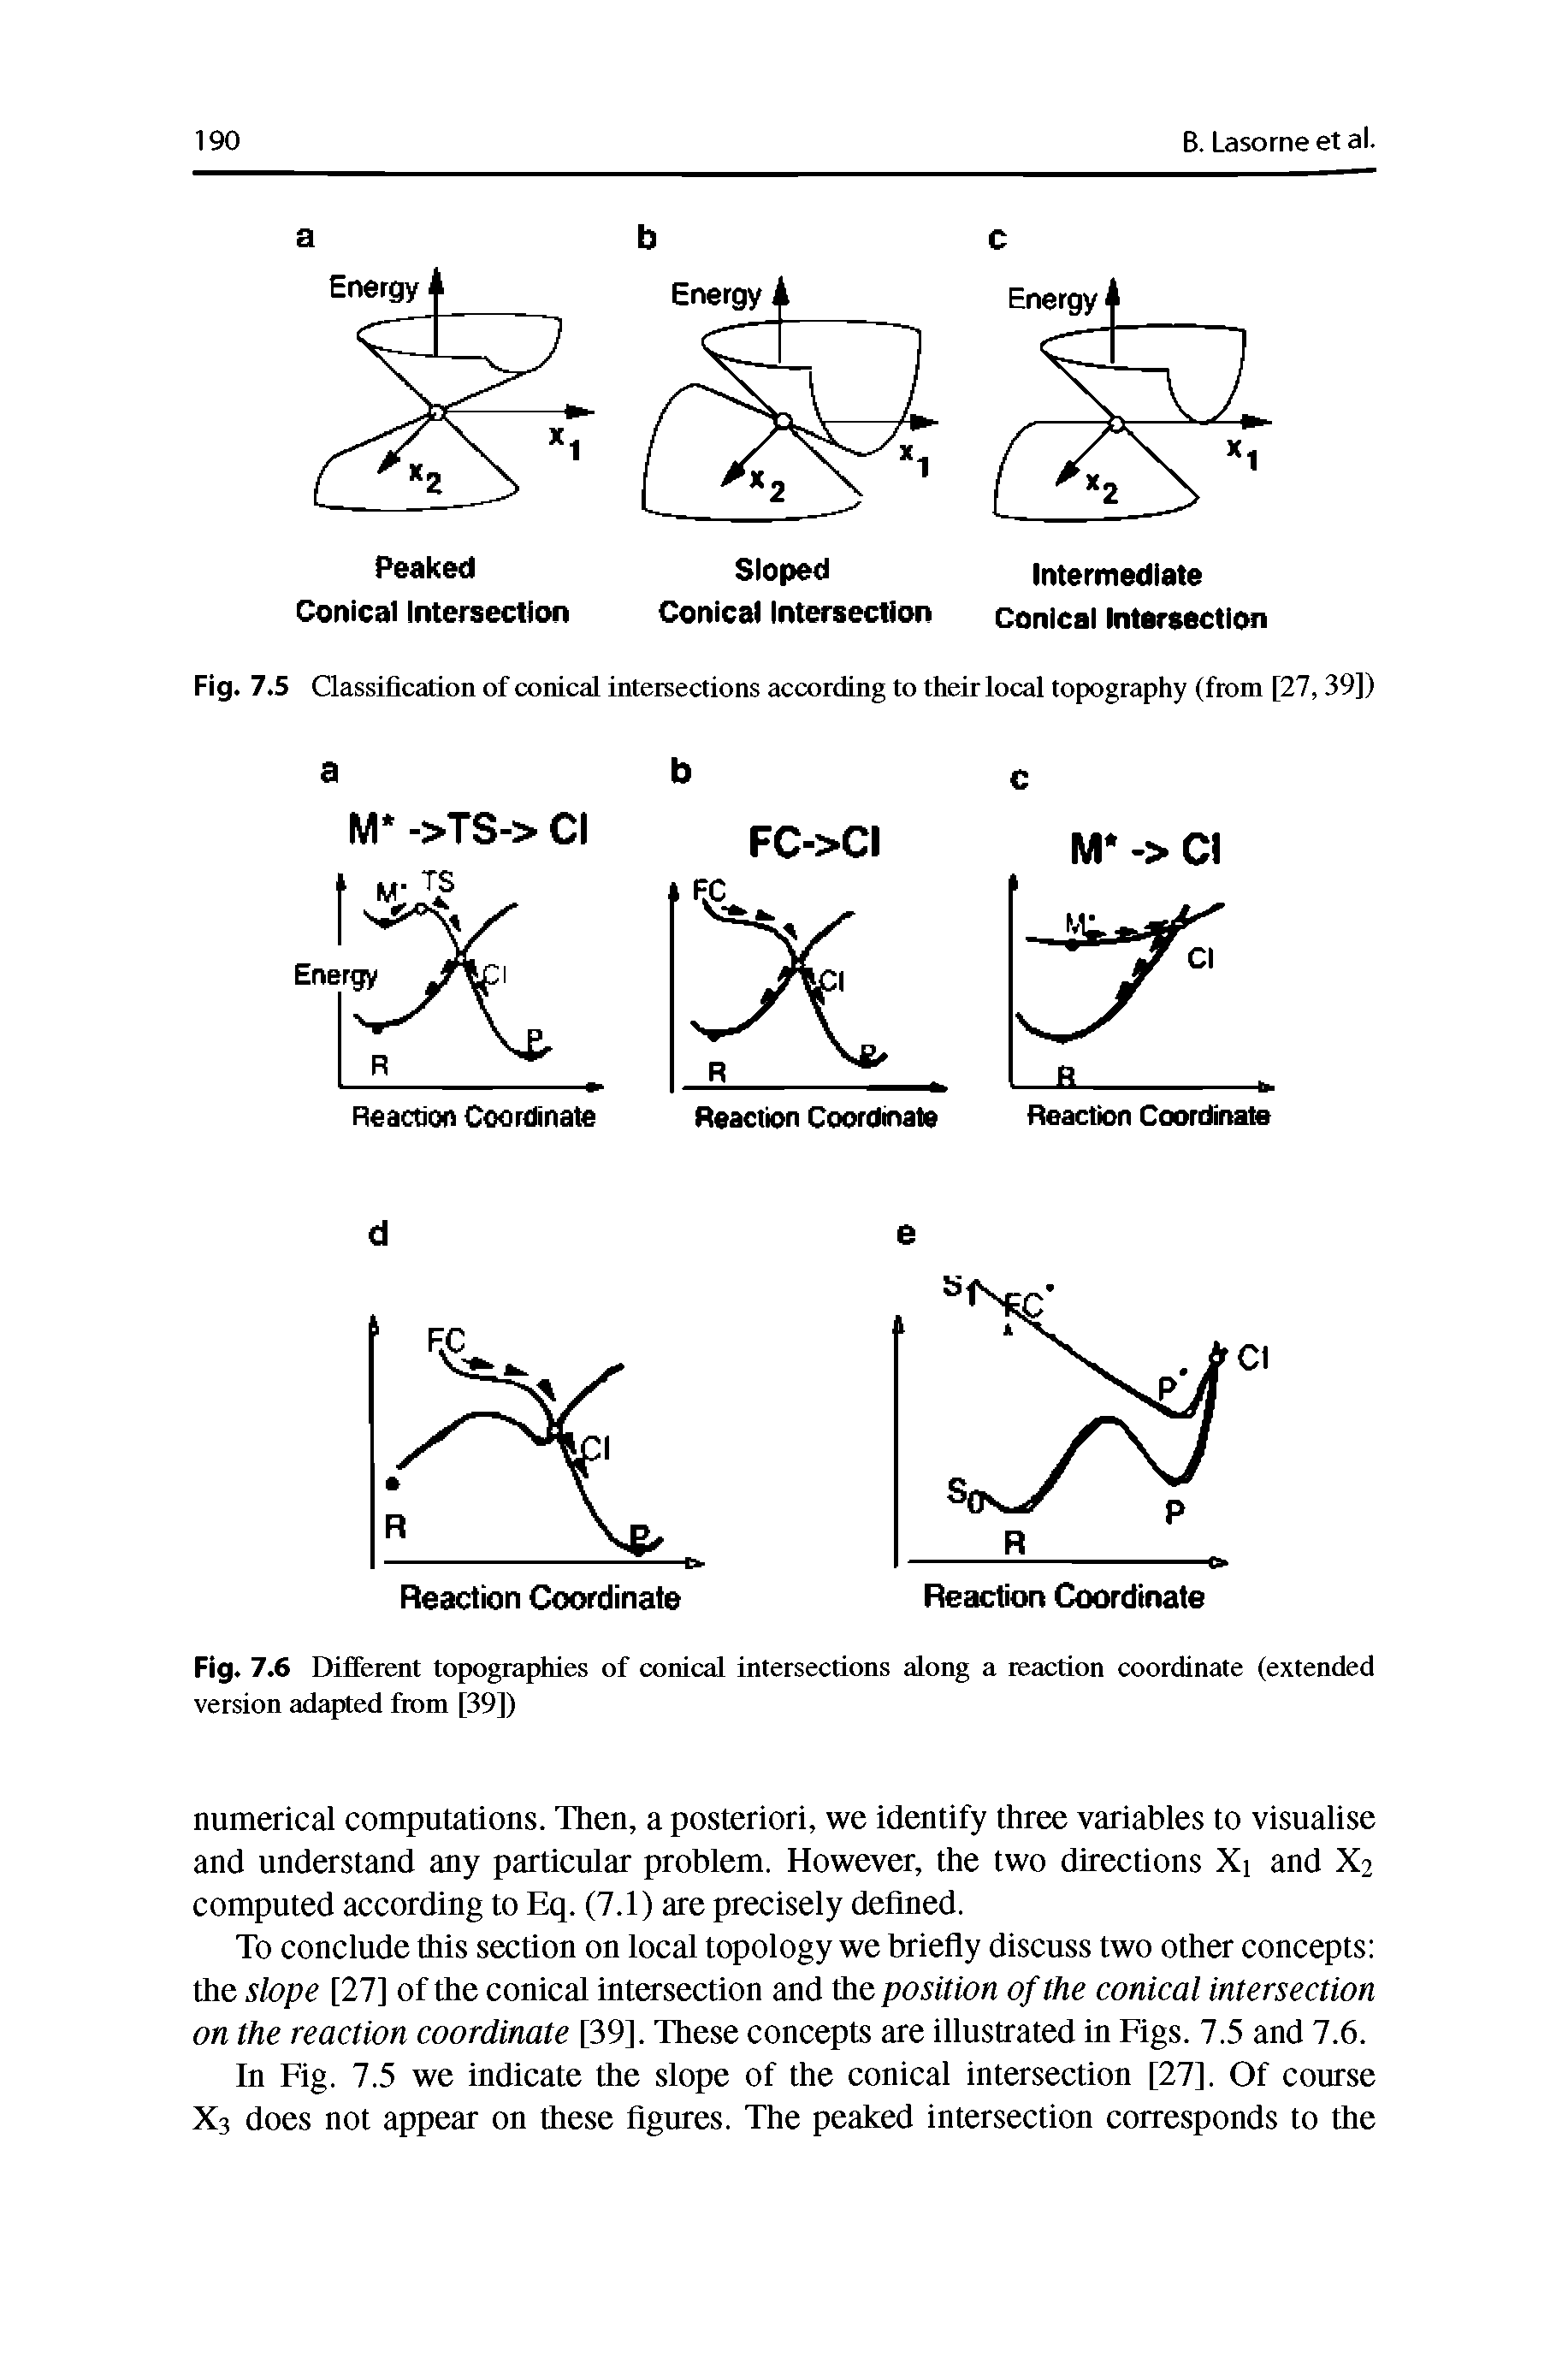 Fig. 7.6 Different topographies of conical intersections along a reaction coordinate (extended version adapted from [39])...